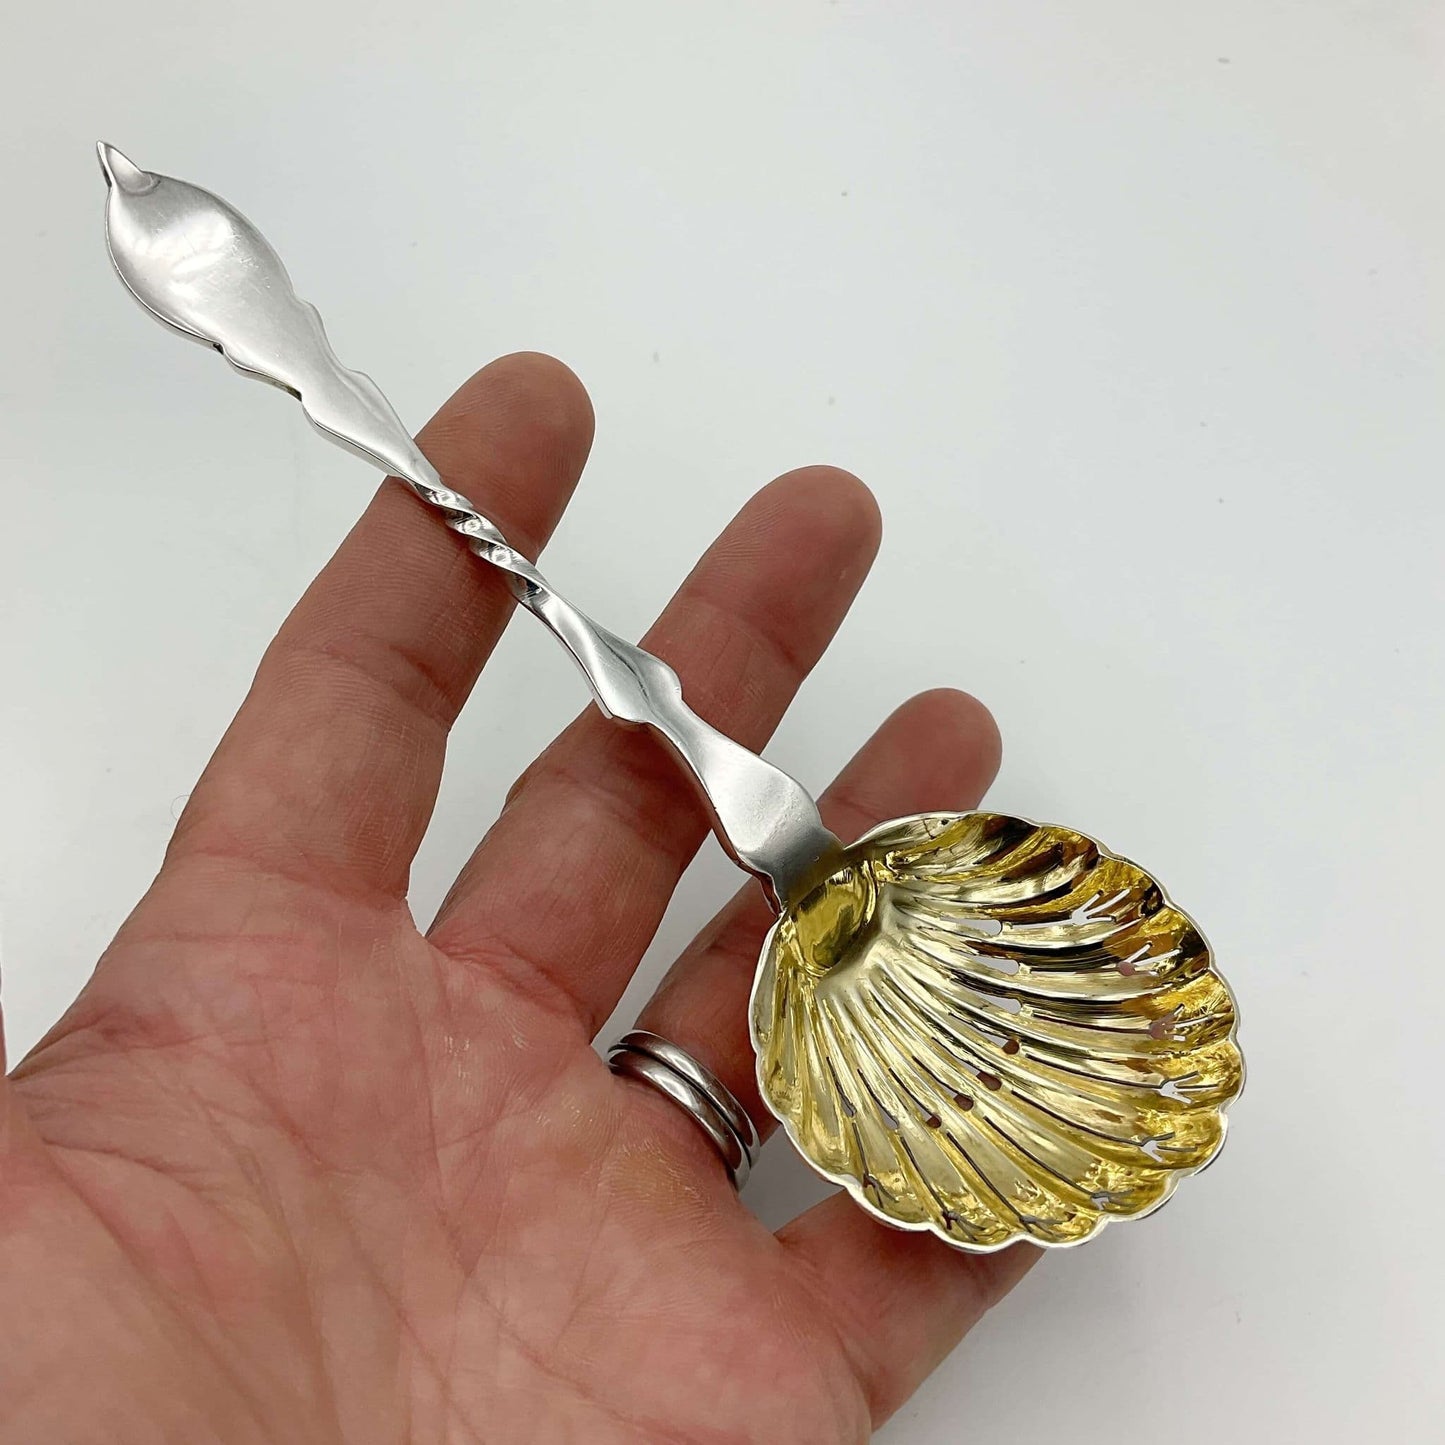 Beautiful gilded Silver sugar sifter spoon held in a hand